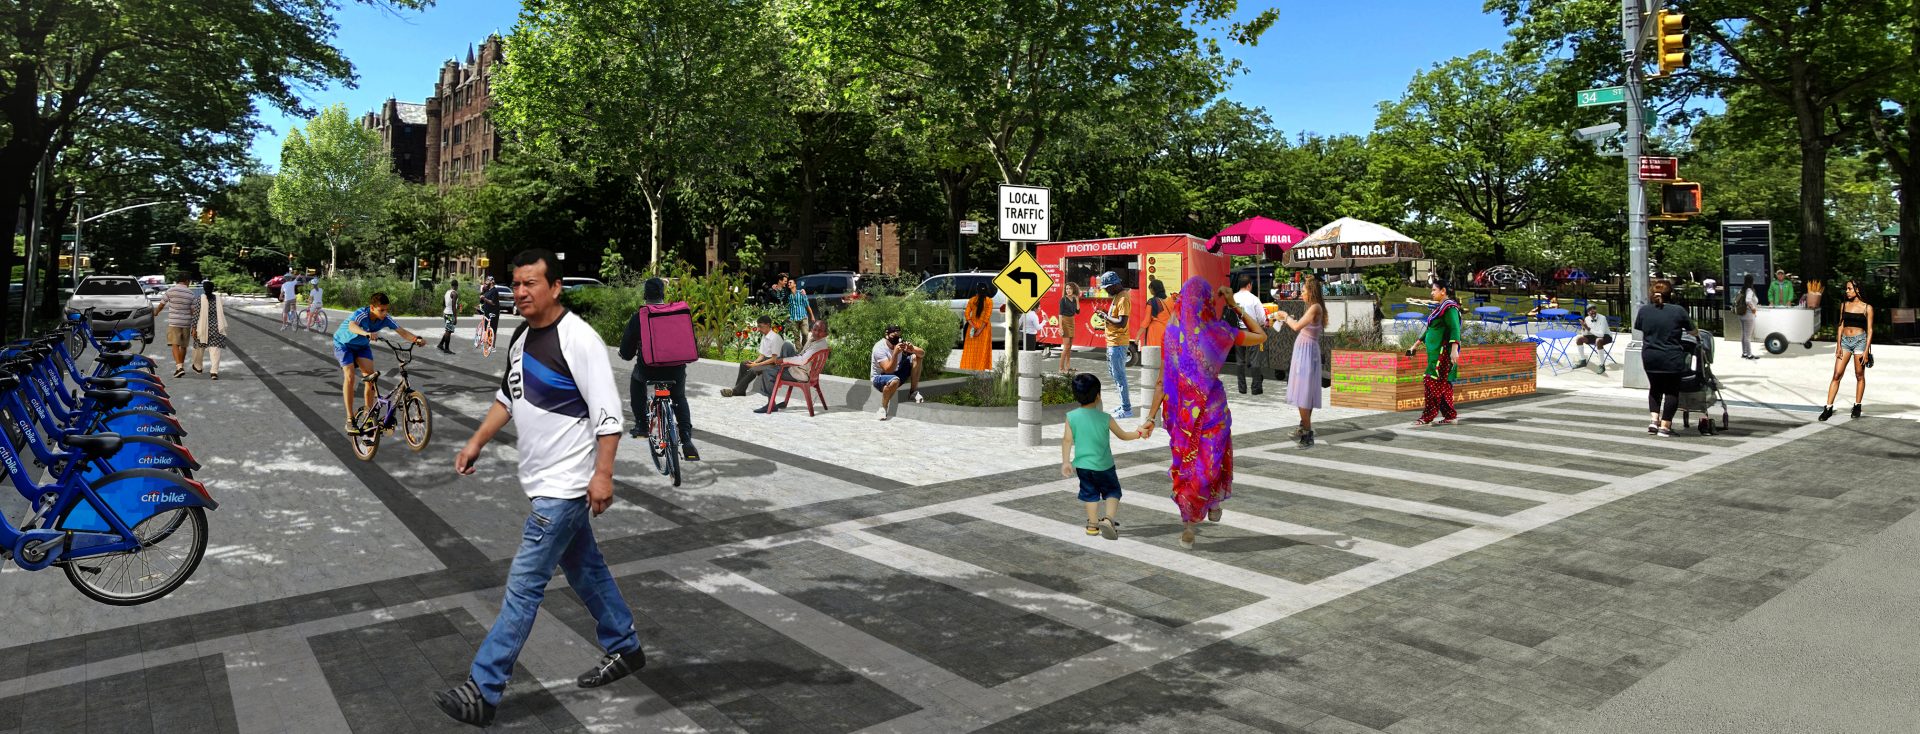 Street Plans Leads Workshop Series to Jump-Start Tactical Urbanism Projects in Six U.S. Cities